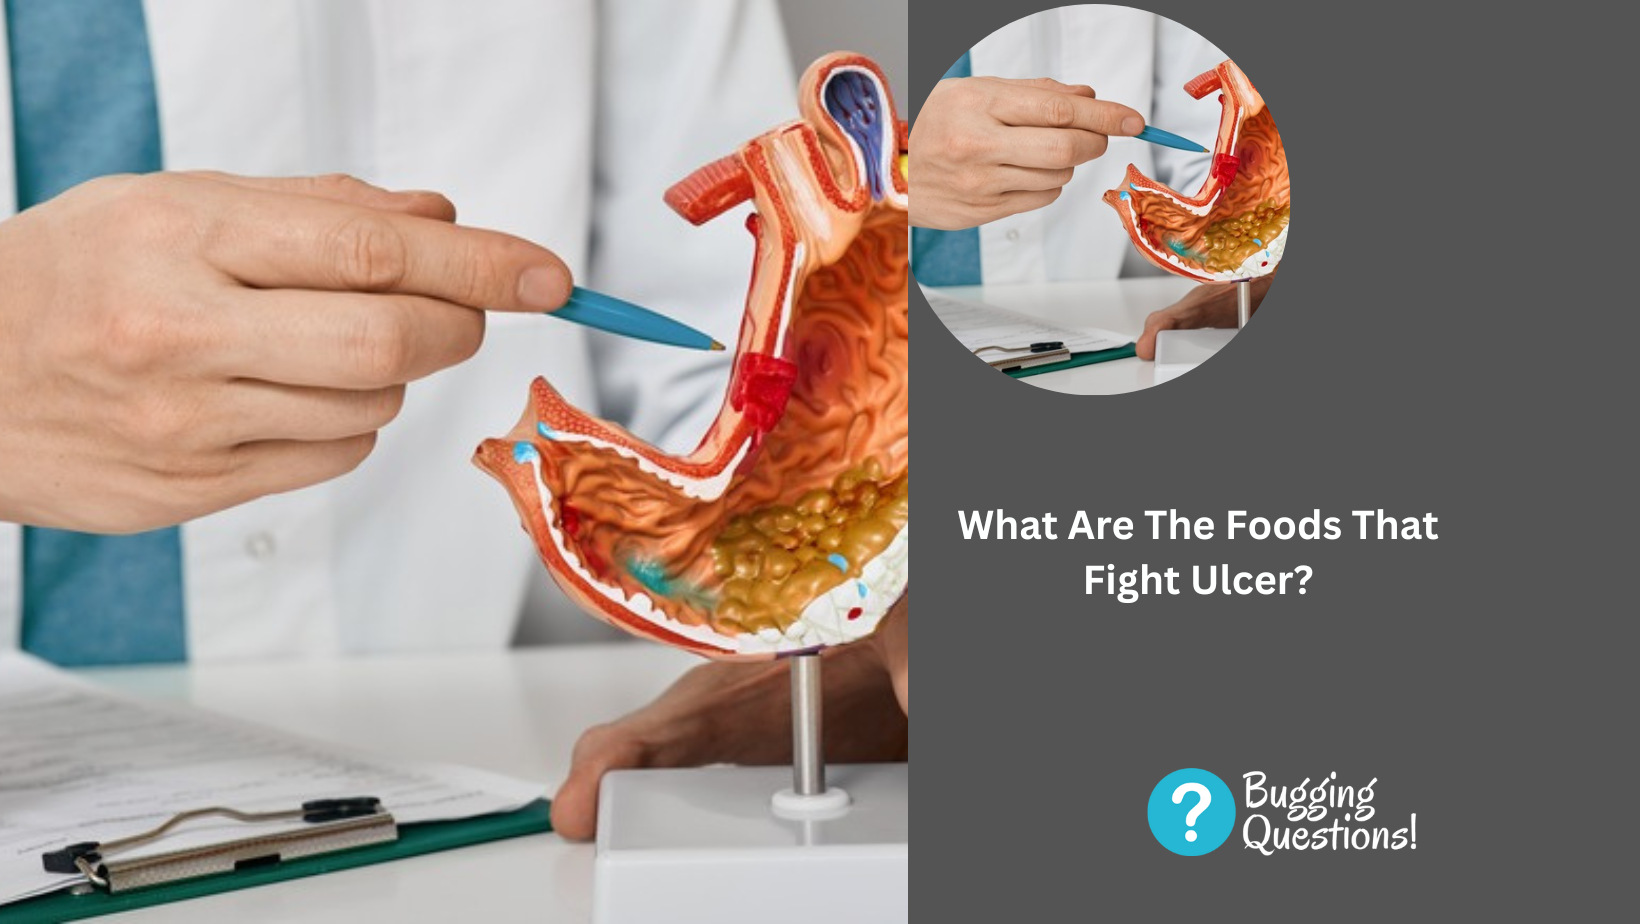 What Are The Foods That Fight Ulcer?